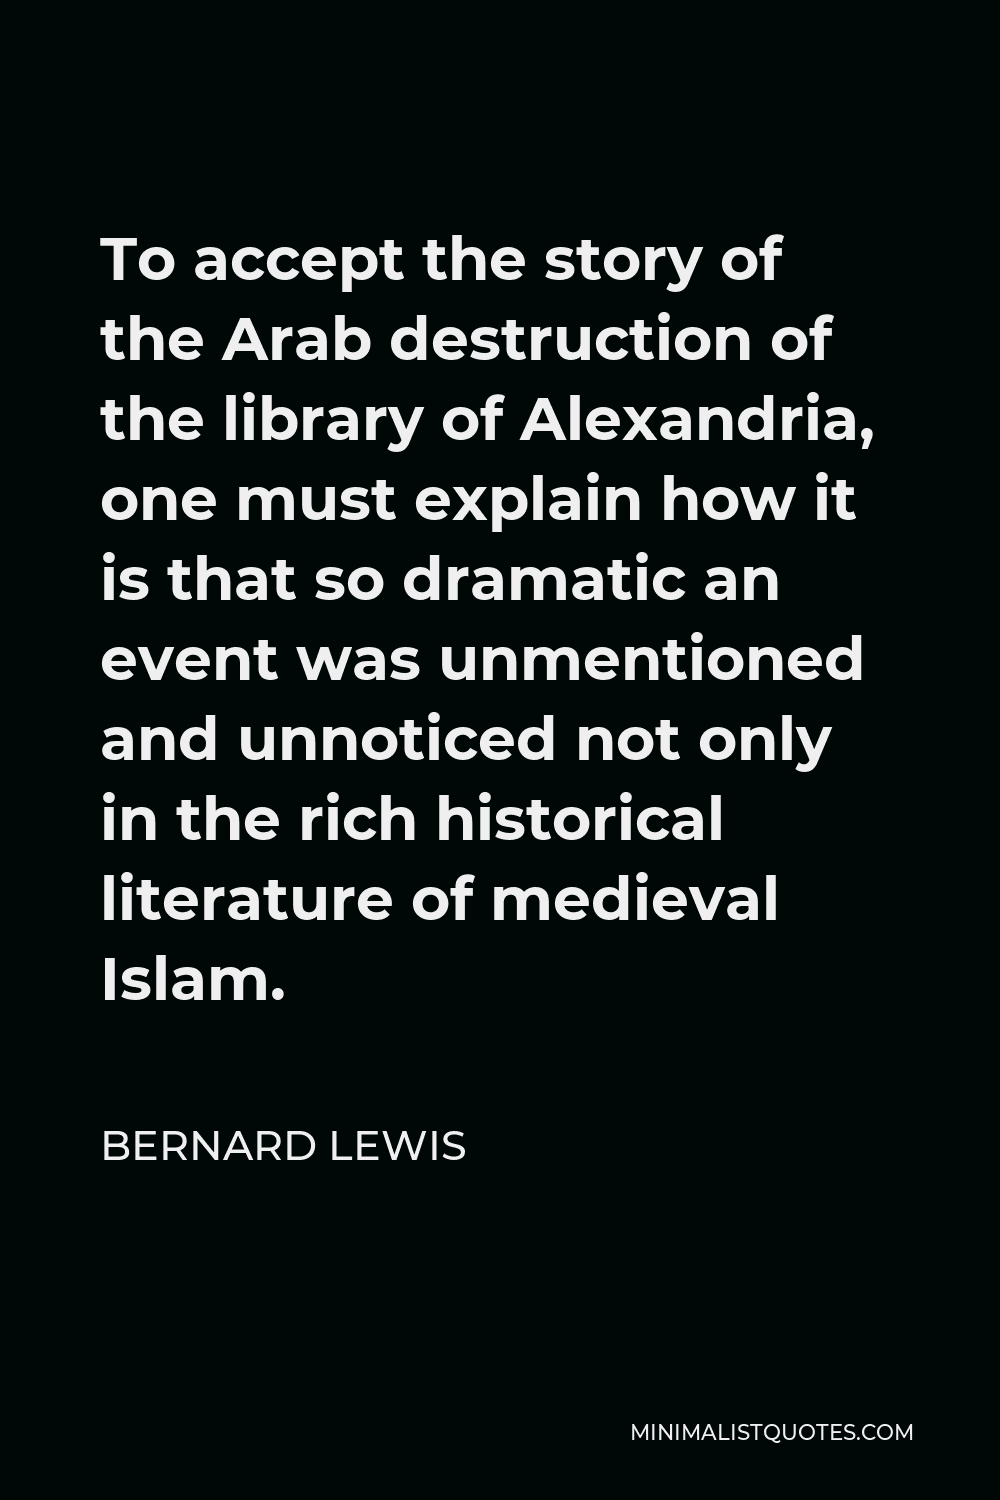 Bernard Lewis Quote - To accept the story of the Arab destruction of the library of Alexandria, one must explain how it is that so dramatic an event was unmentioned and unnoticed not only in the rich historical literature of medieval Islam.